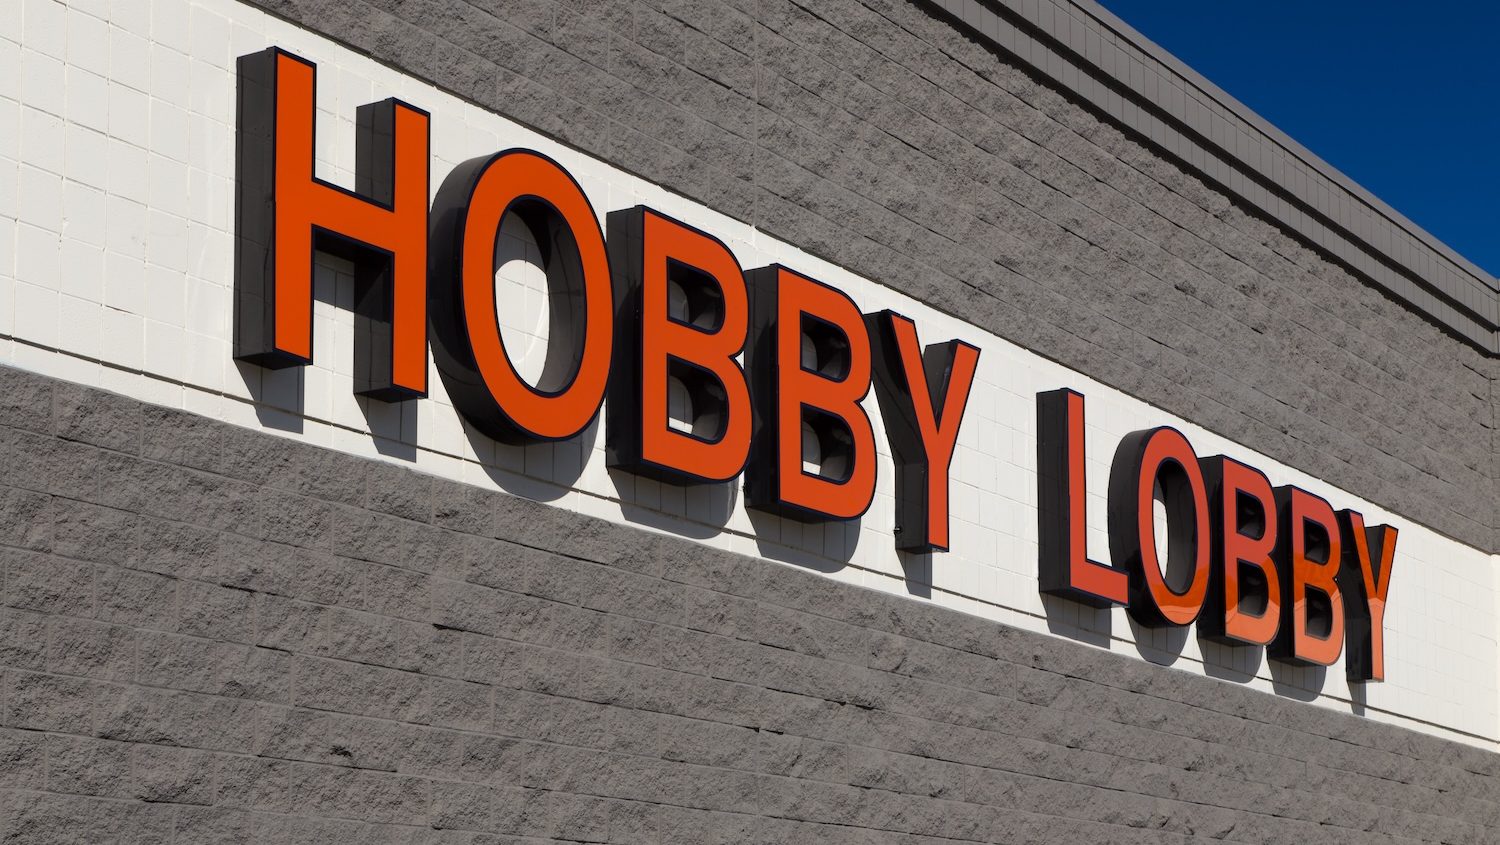 5-gifts-for-mom-that-can-be-found-at-a-good-price-at-hobby-lobby